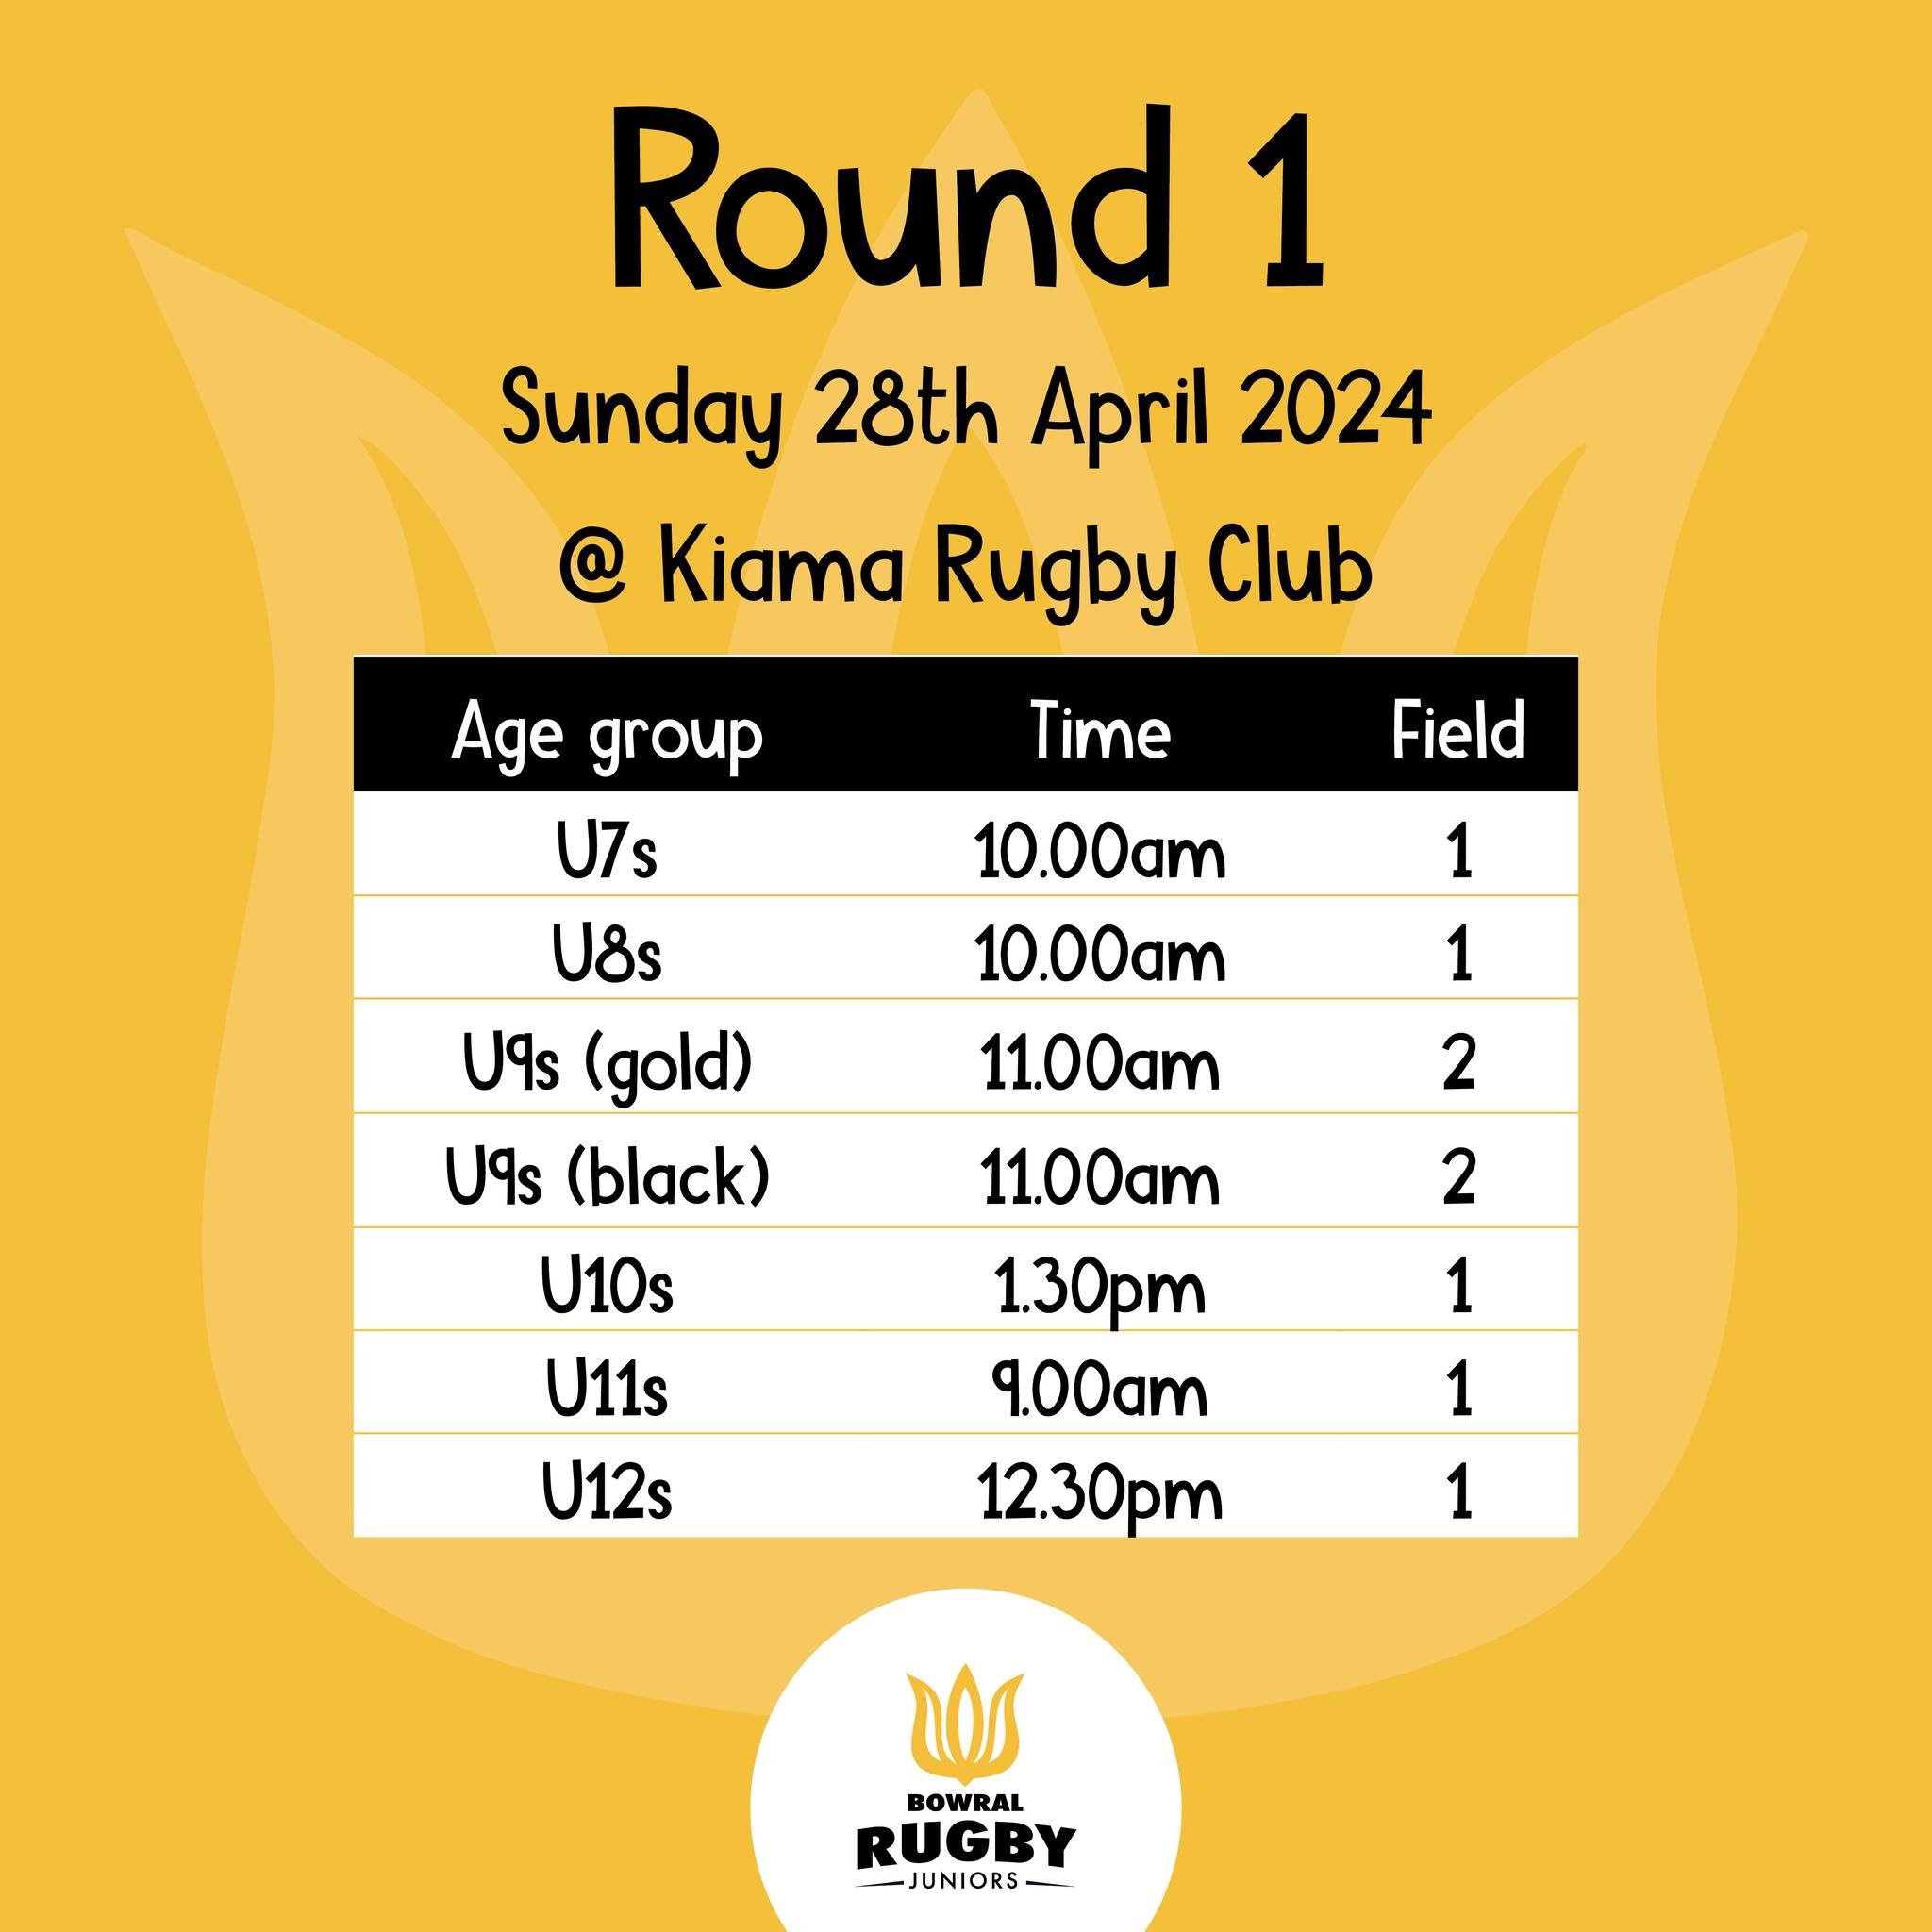 🏉 The round 1 fixtures have now been announced... all teams are playing at Kiama Rugby Club this Sunday.

Please note that times/details may change at the last minute, so keep an eye on your teams WhatsApp groups for any updates to the advertised sc